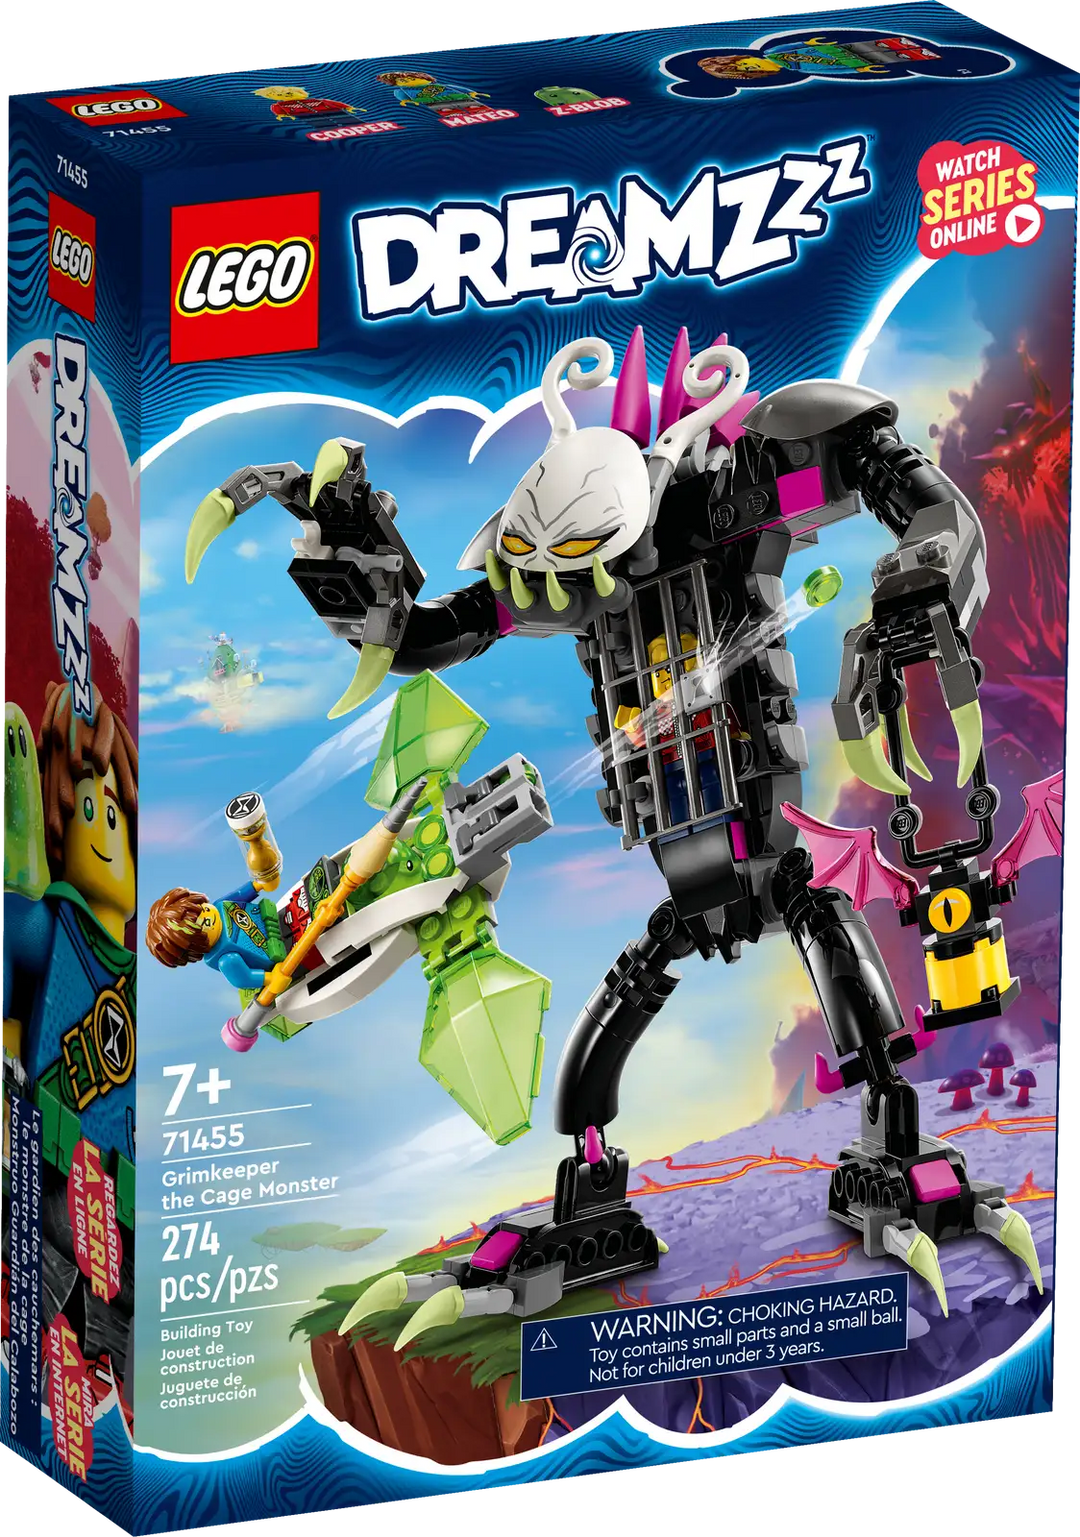 Lego DREAMZZZ Grimkeeper the Cage Monster